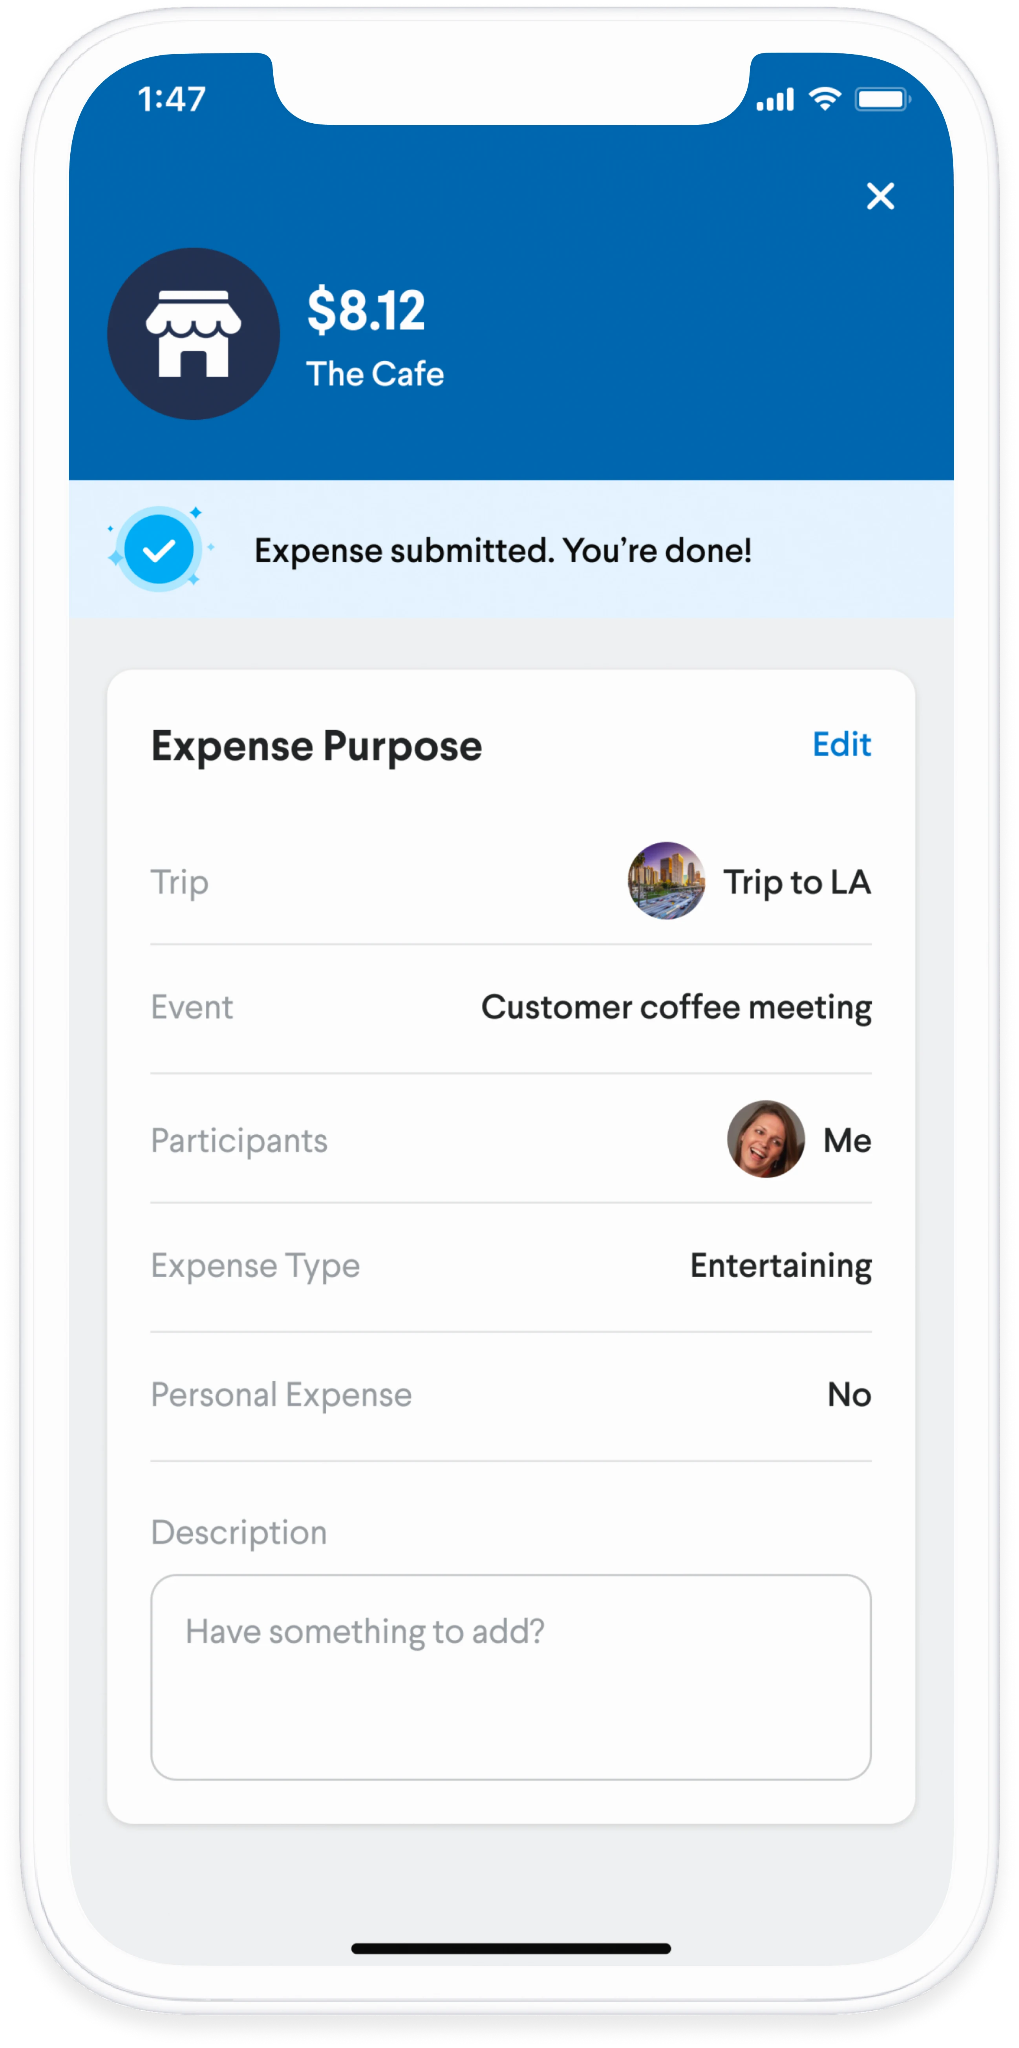 Submitting expenses via the mobile app during the business trip 